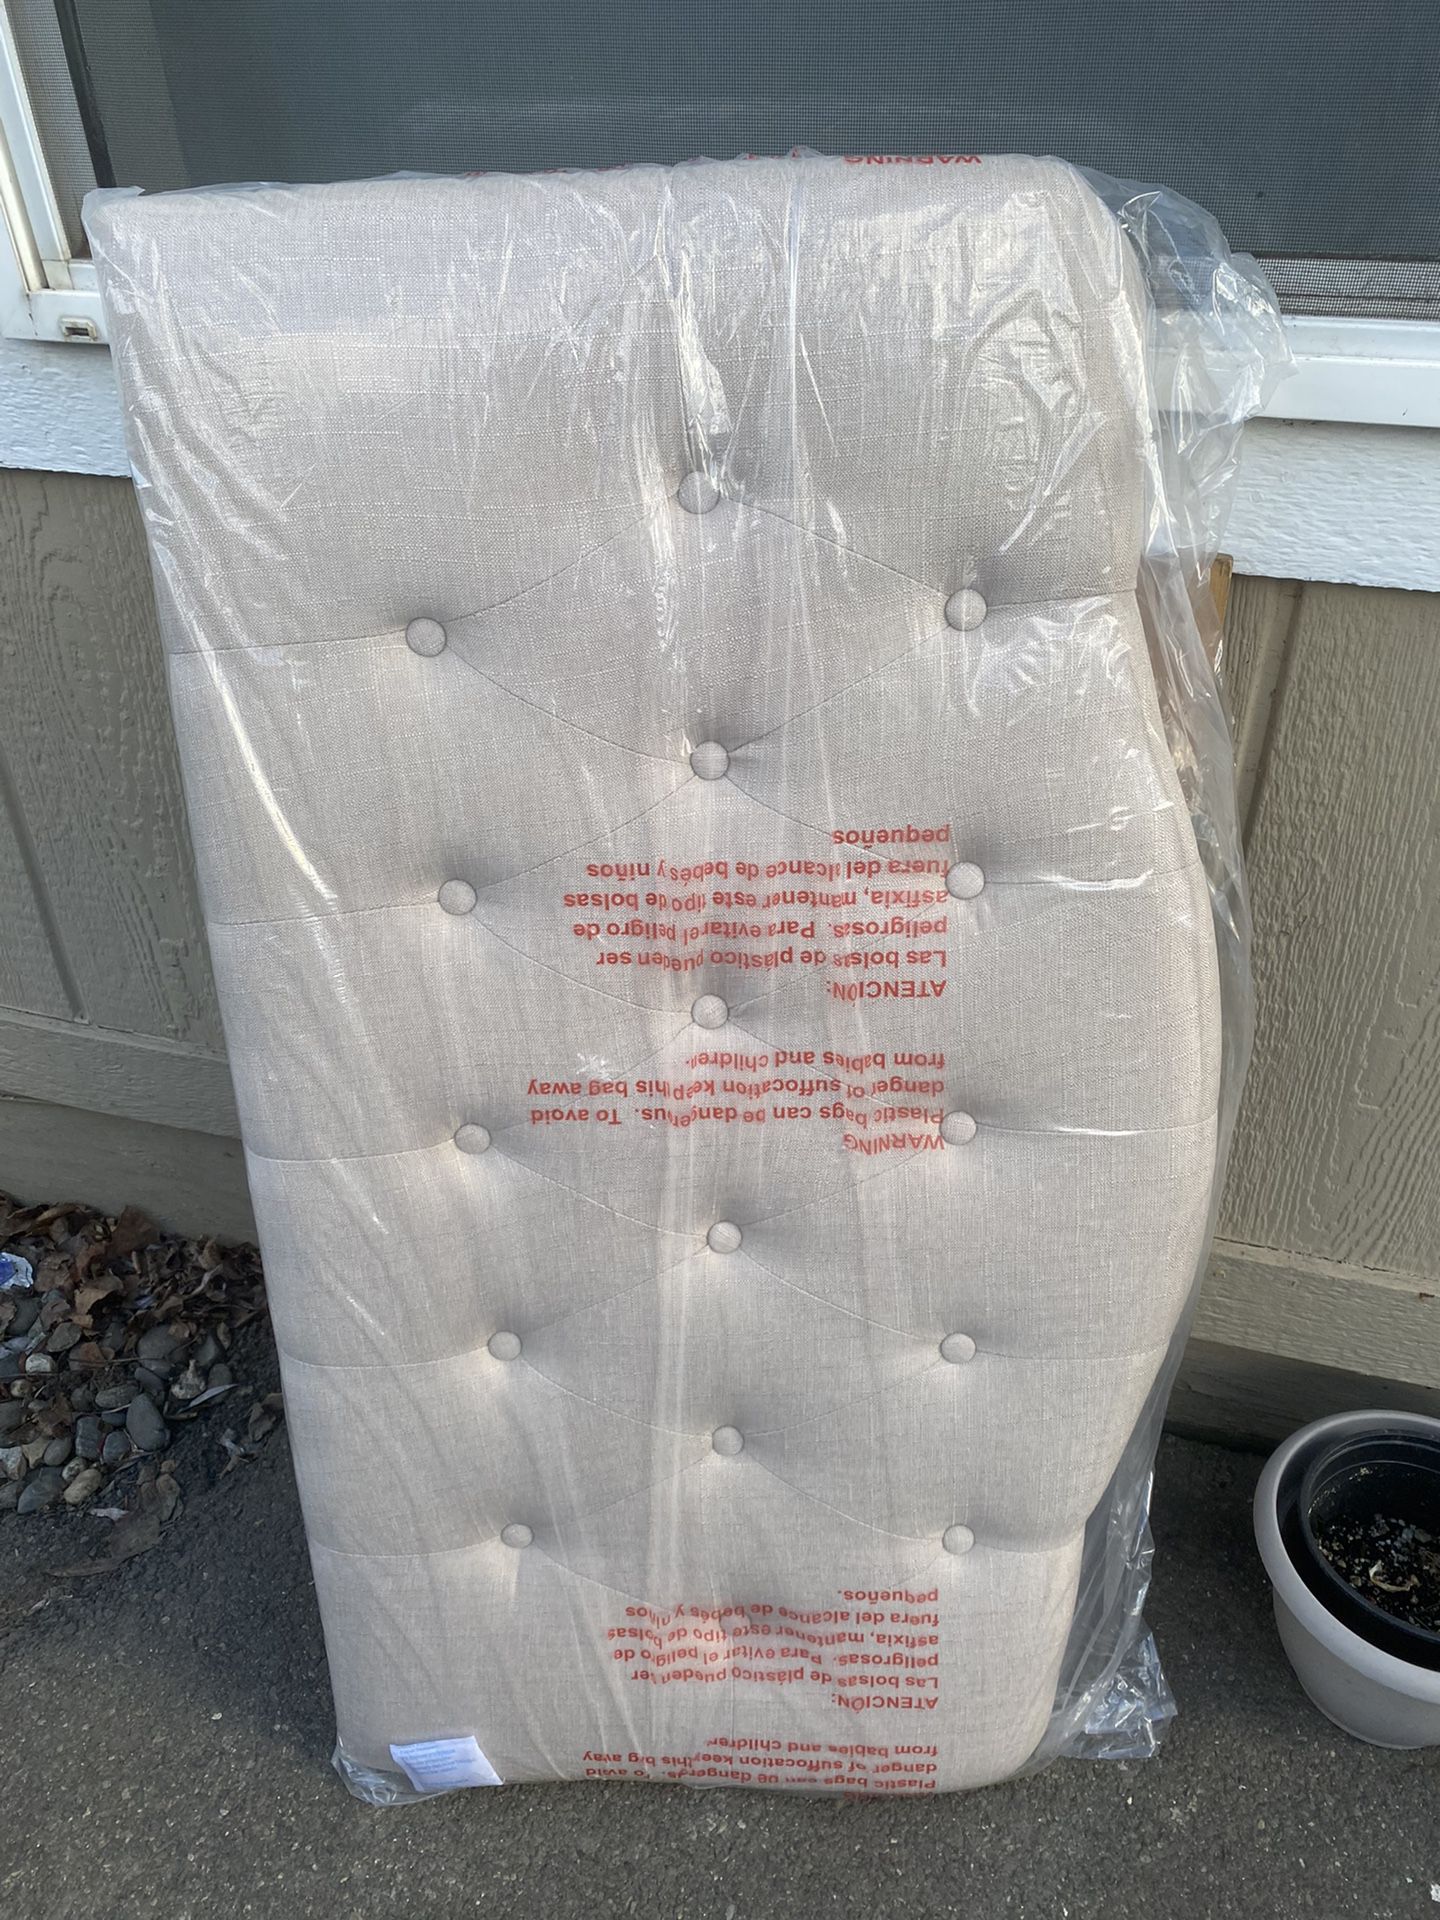 $100-(firm price) brand new still in package wrap-Beige color twin size headboard new in package-I bought from amazon aug 2020 but never did open it t